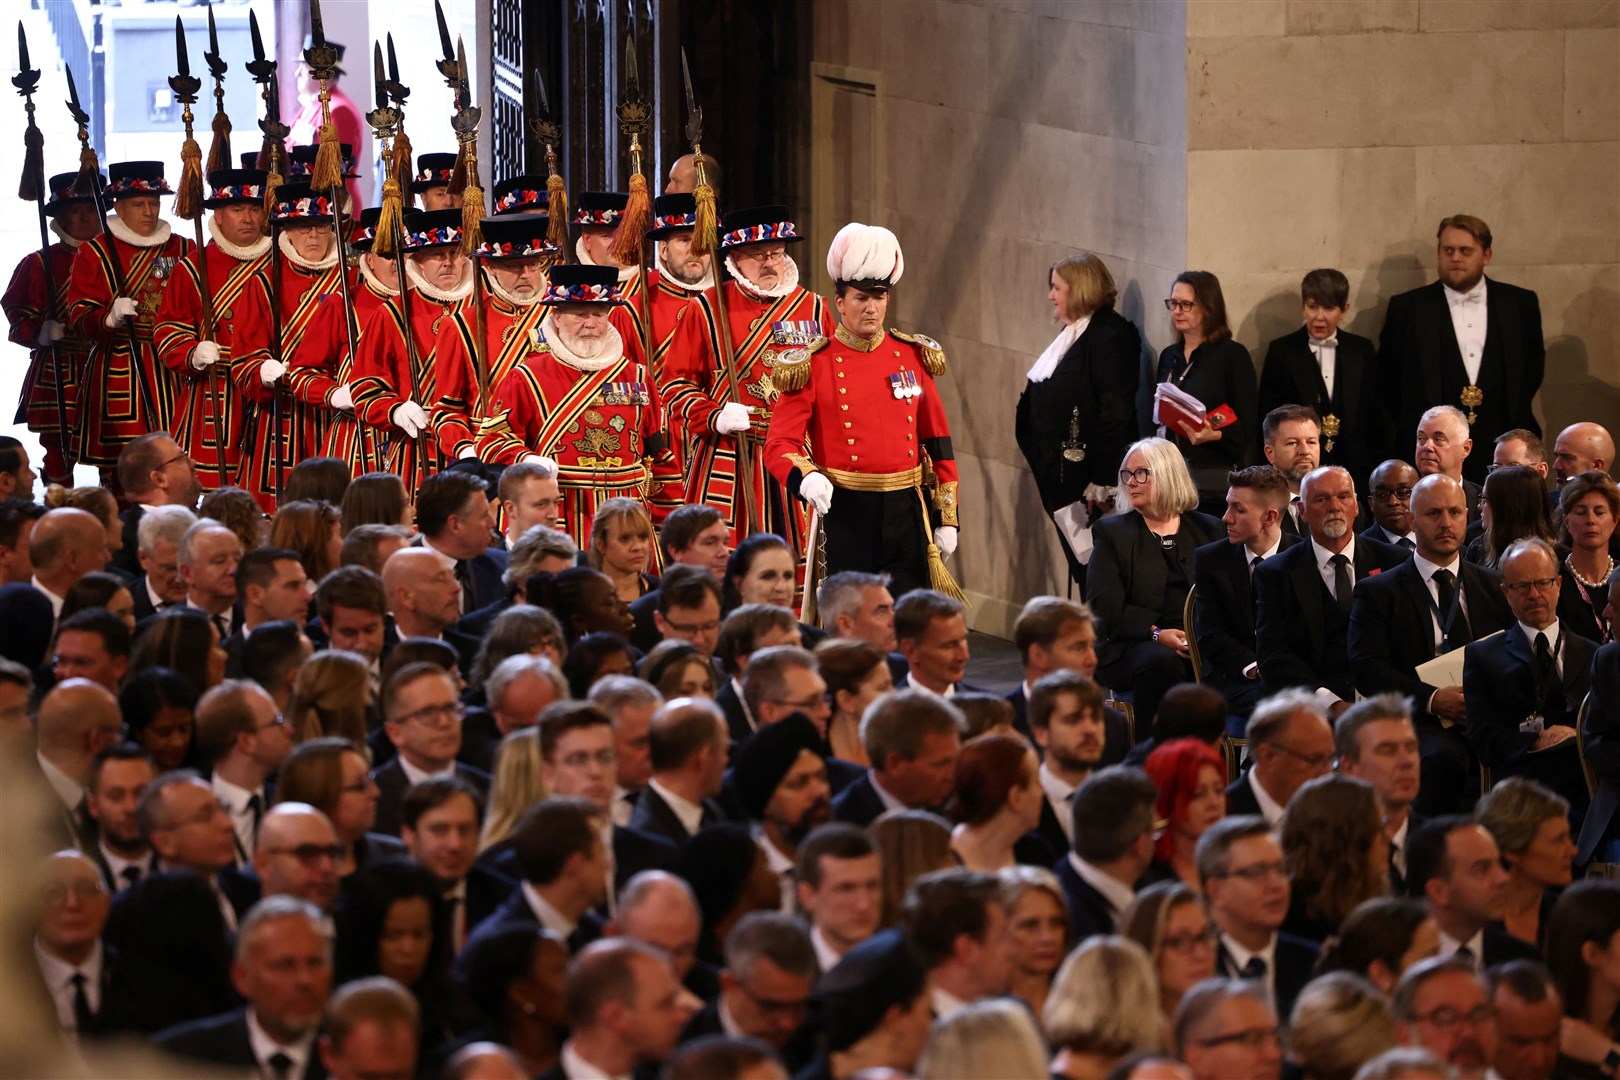 The King’s Body Guard of the Yeomen of the Guard ahead of the King’s arrival at the Westminster Hall service (Henry Nicholls/PA)